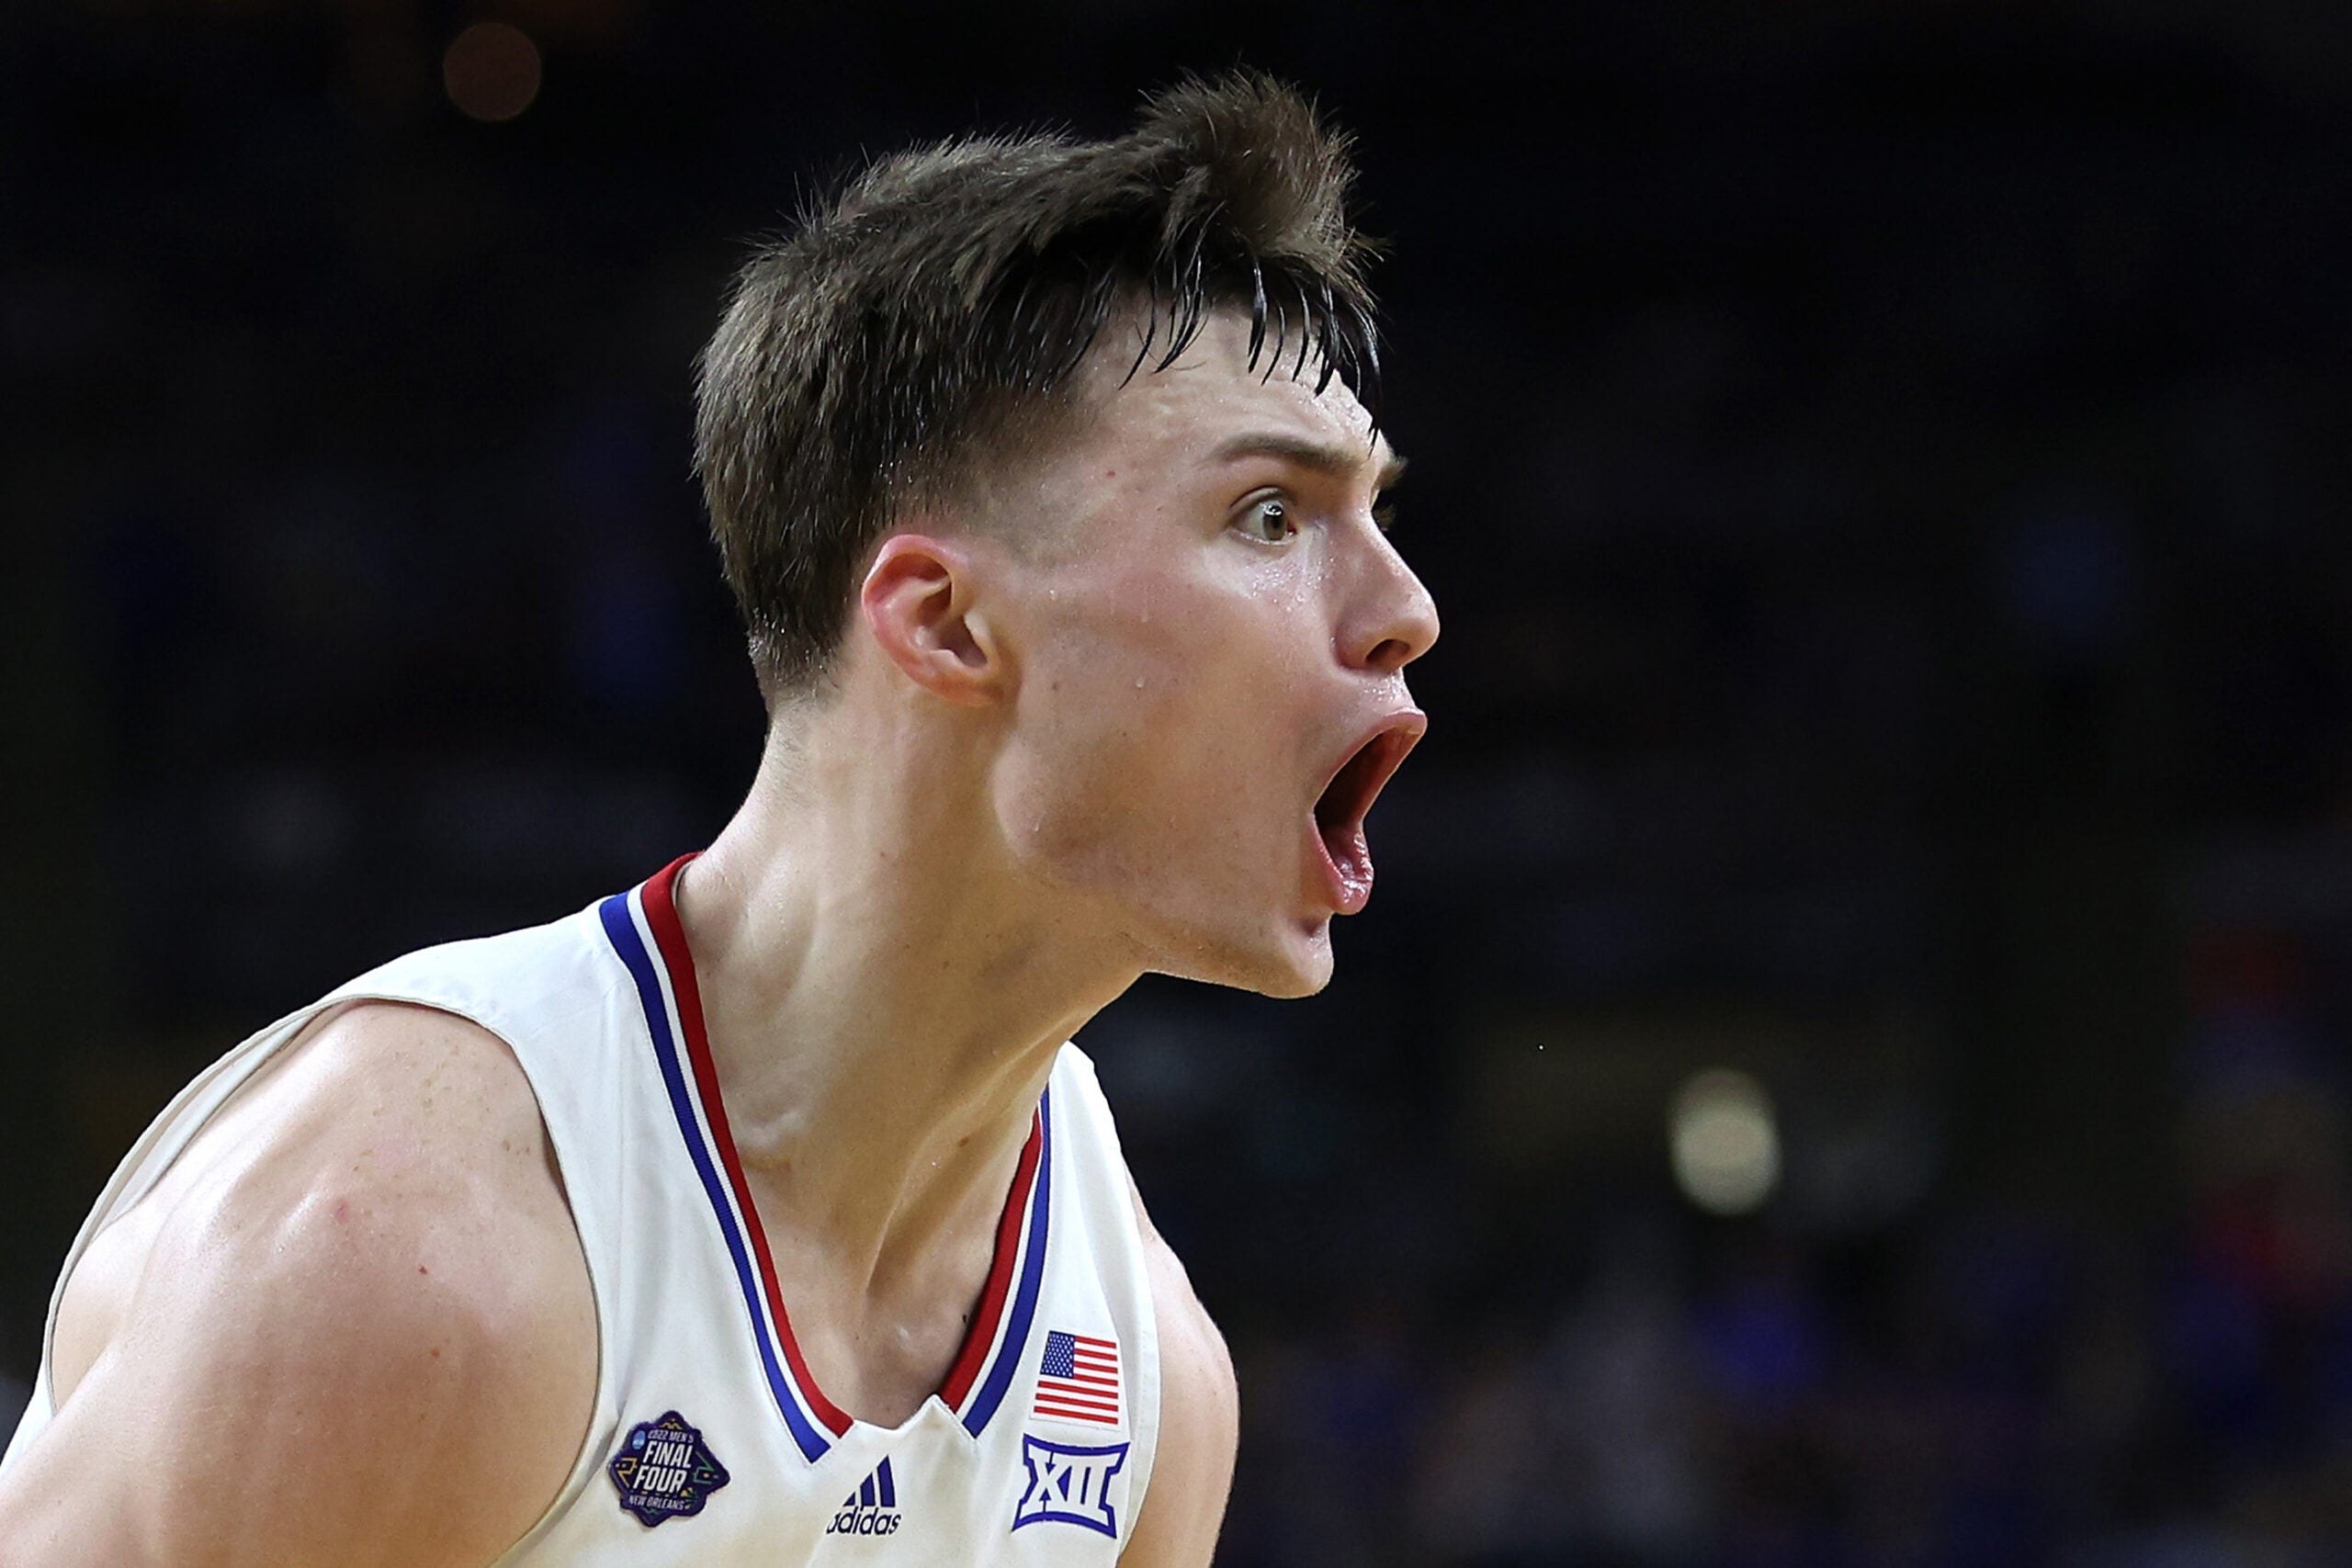 Christian Braun #2 of the Kansas Jayhawks reacts in the second half of the game against the North Carolina Tar Heels during the 2022 NCAA Men's Basketball Tournament National Championship.